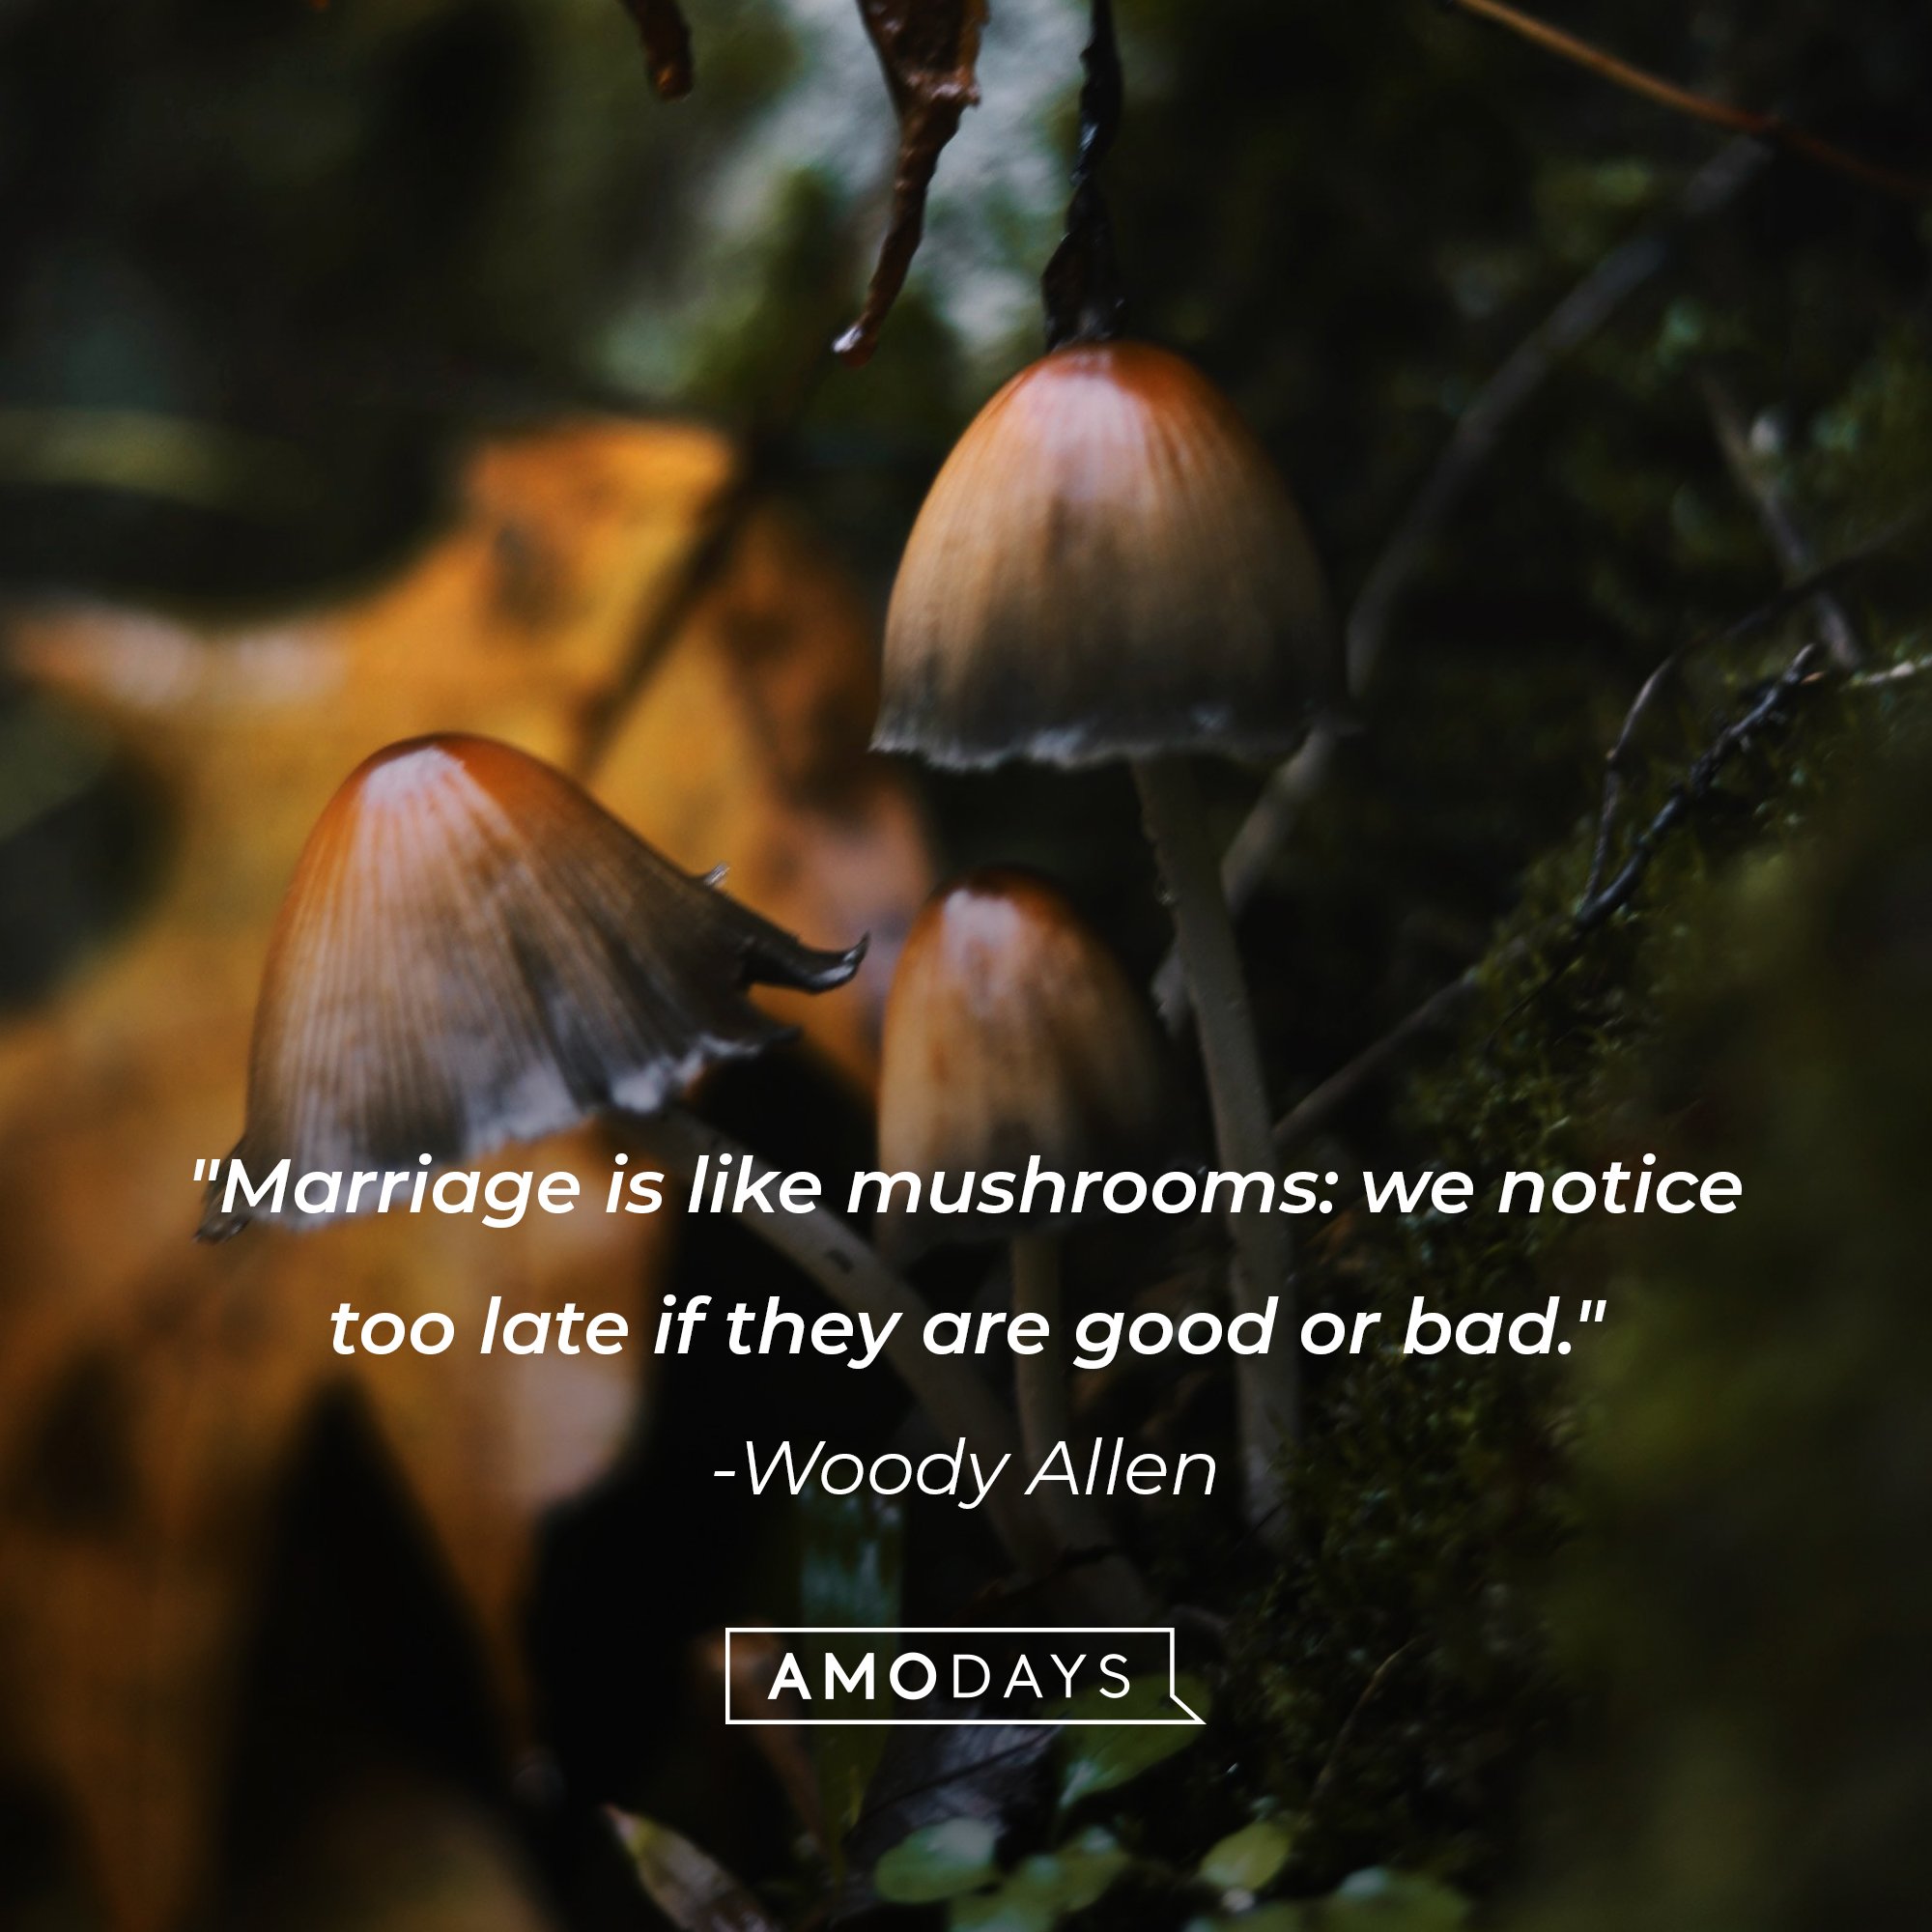  Woody Allen’s quote: "Marriage is like mushrooms: we notice too late if they are good or bad." | Image: AmoDays